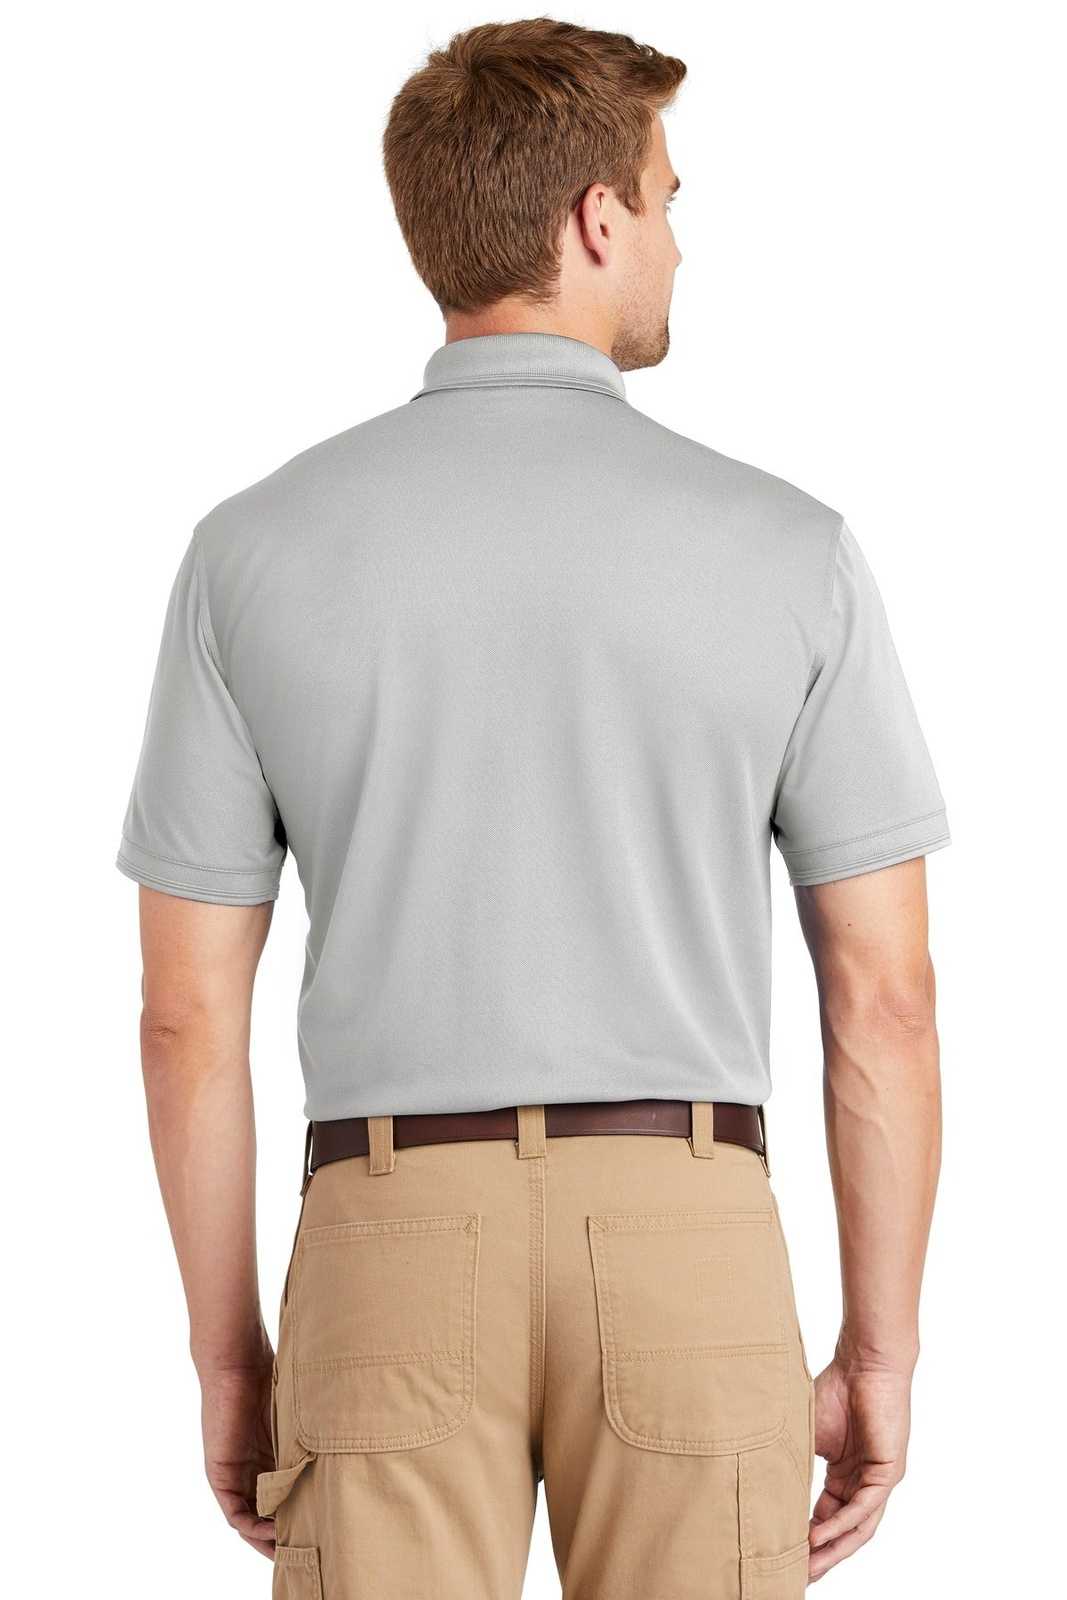 CornerStone CS4020 Industrial Snag-Proof Pique Polo - Light Gray - HIT a Double - 2